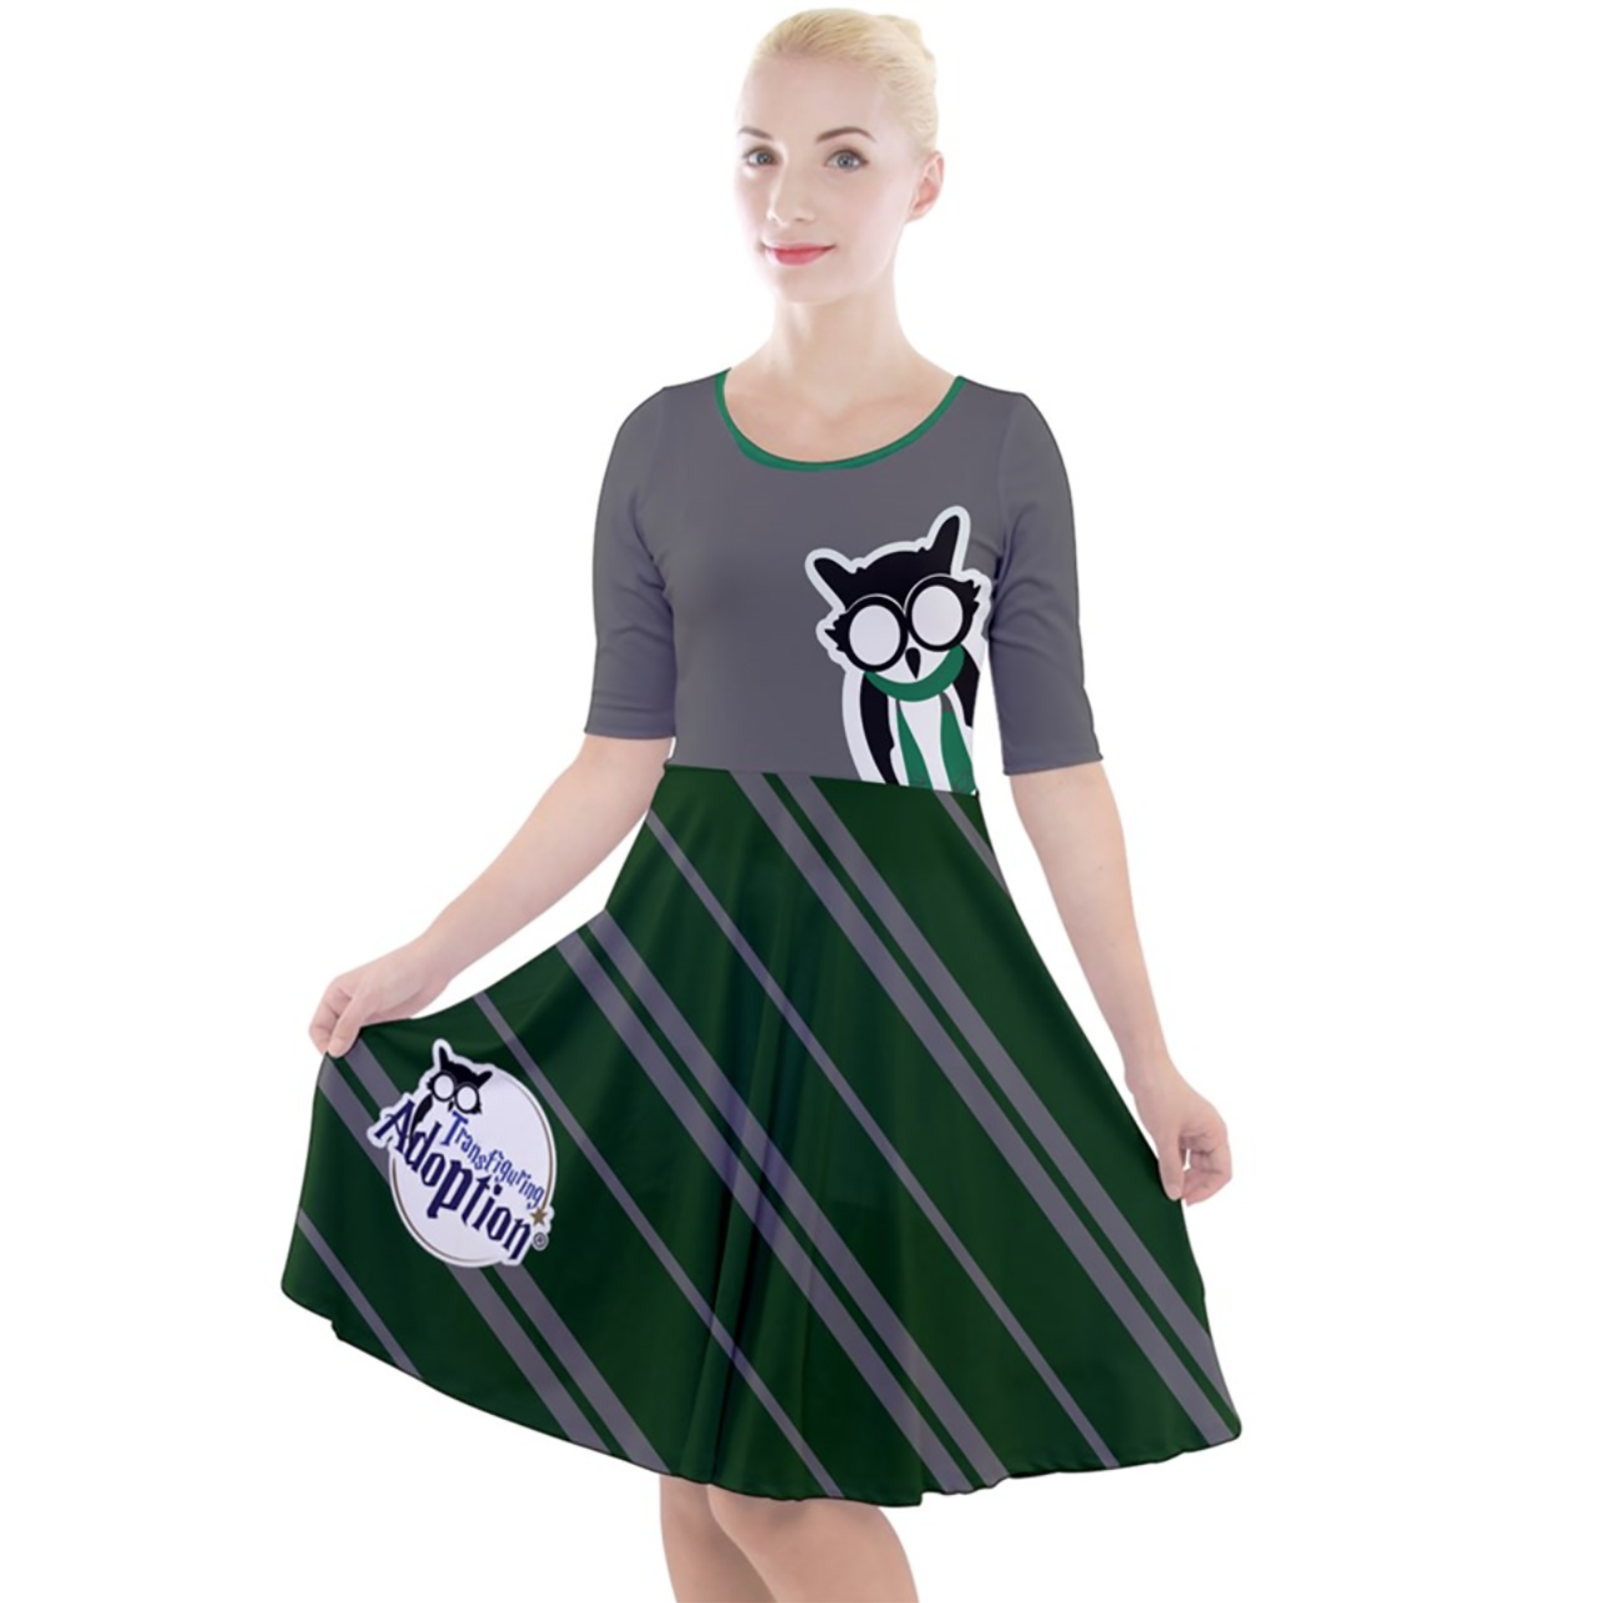 Owl (Green) Striped Dress - Quarter Sleeve A-Line Dress - Inspired by Slytherin